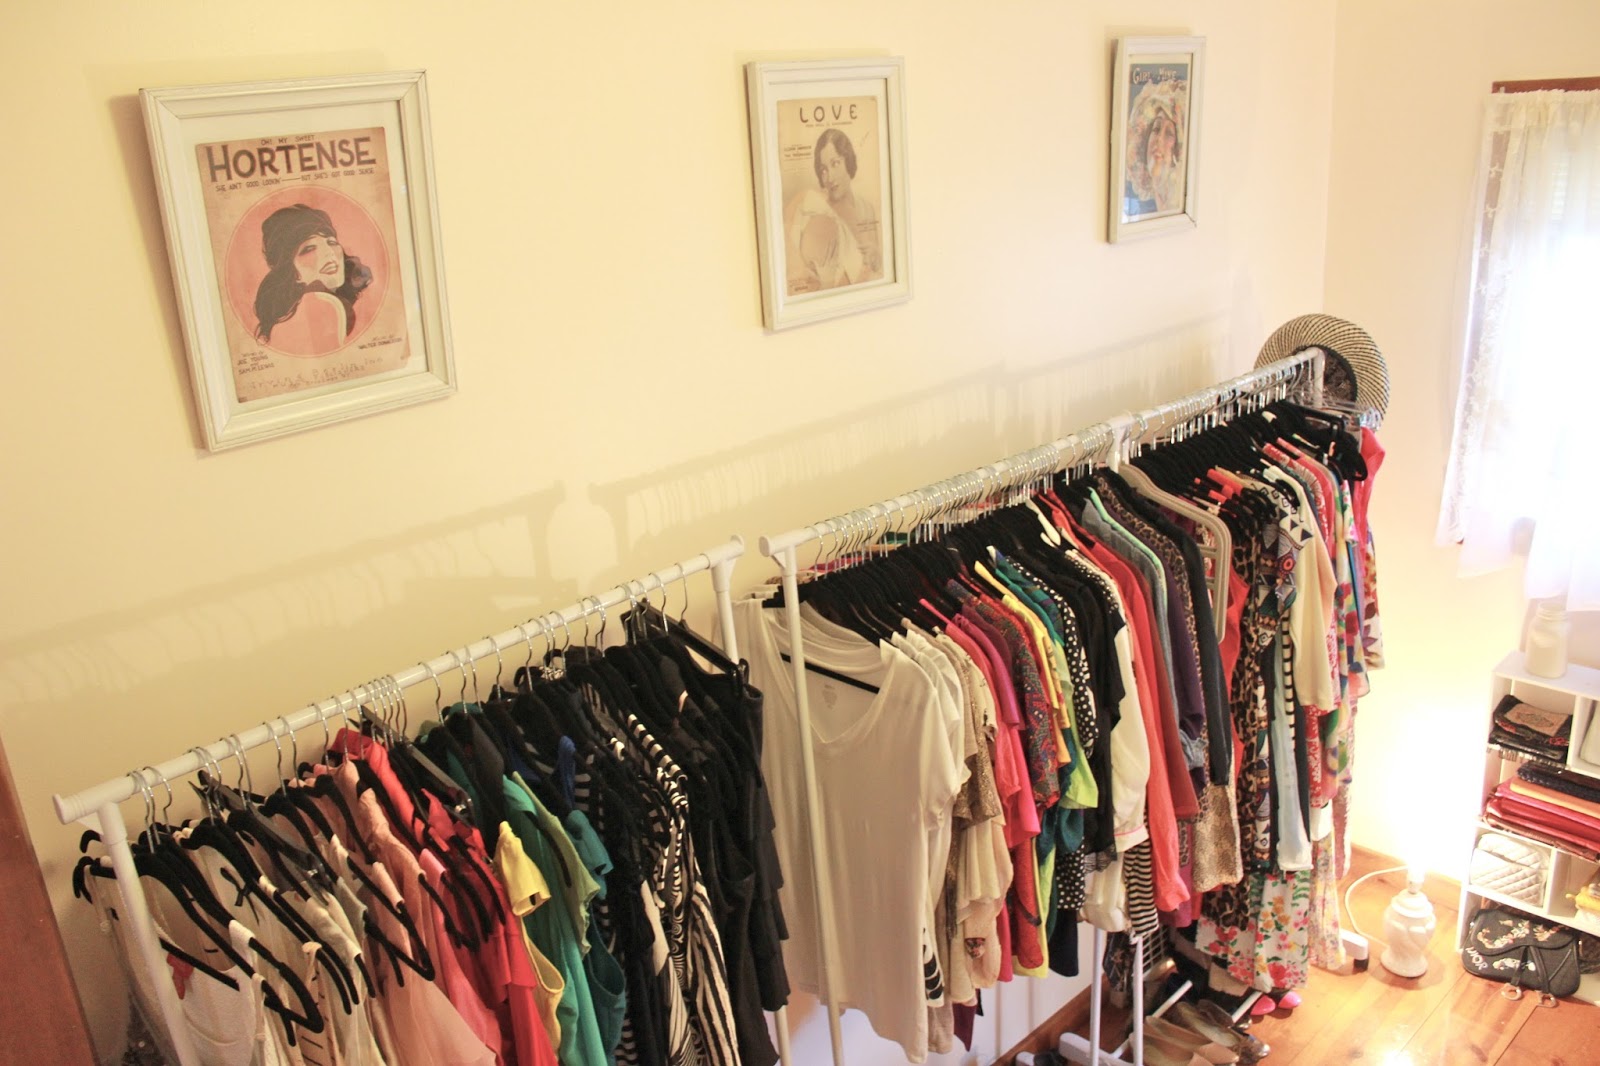 How To Turn A Room Into A Walk-in Closet - Home Design Inside